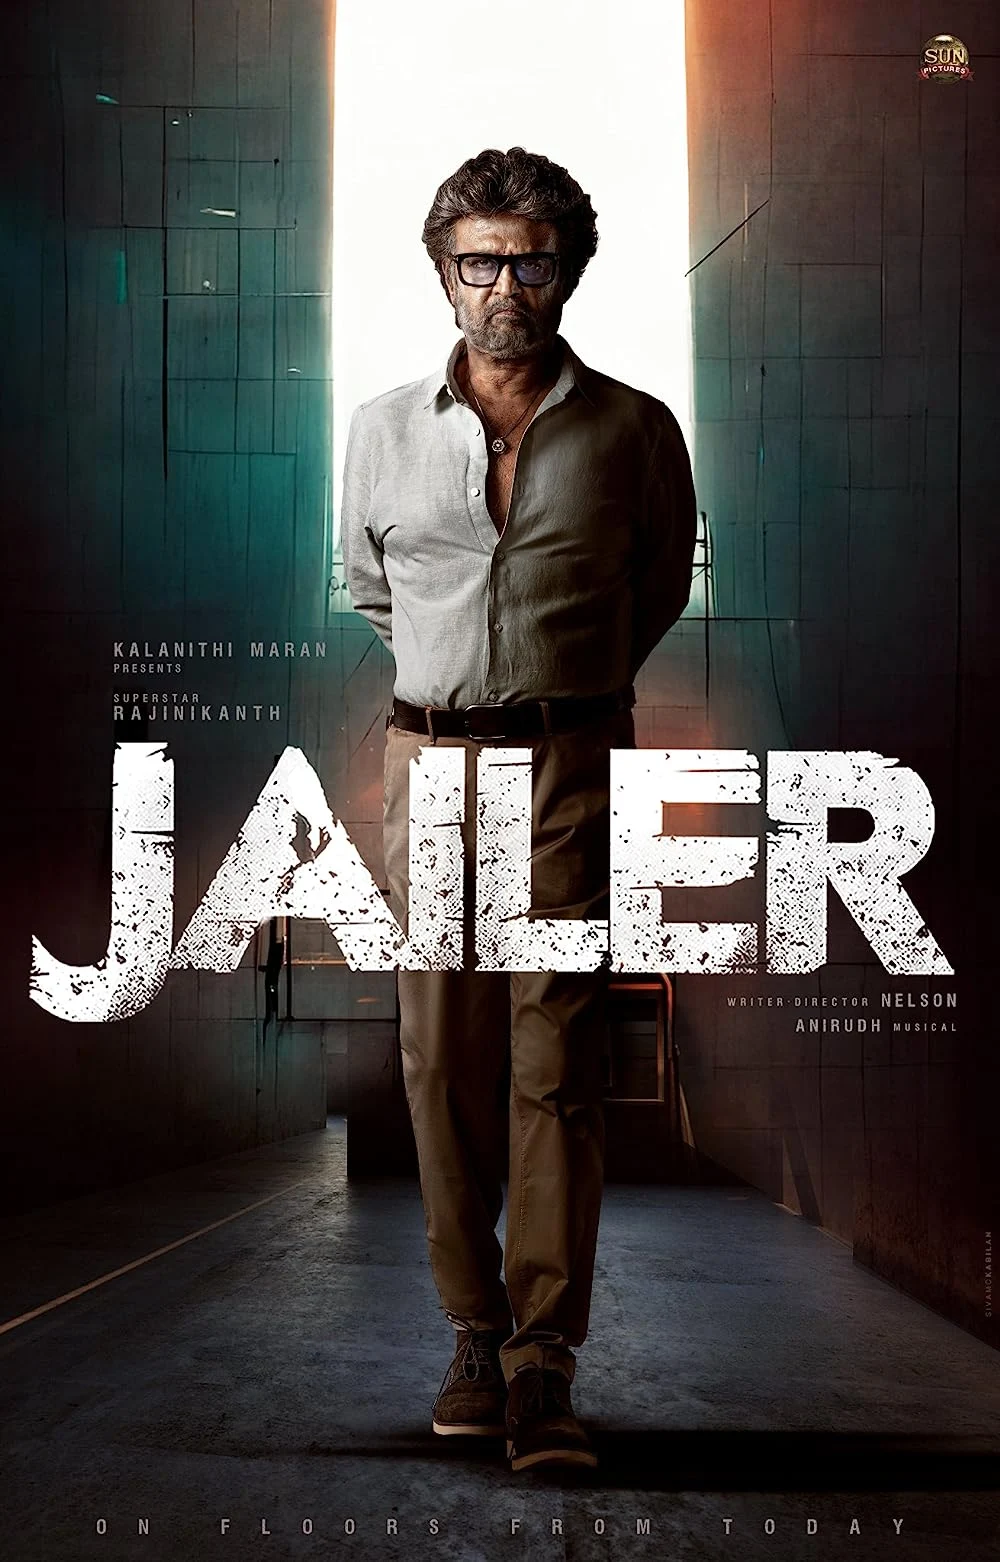 Jailer Movie Budget, Box Office Collection, Hit or Flop